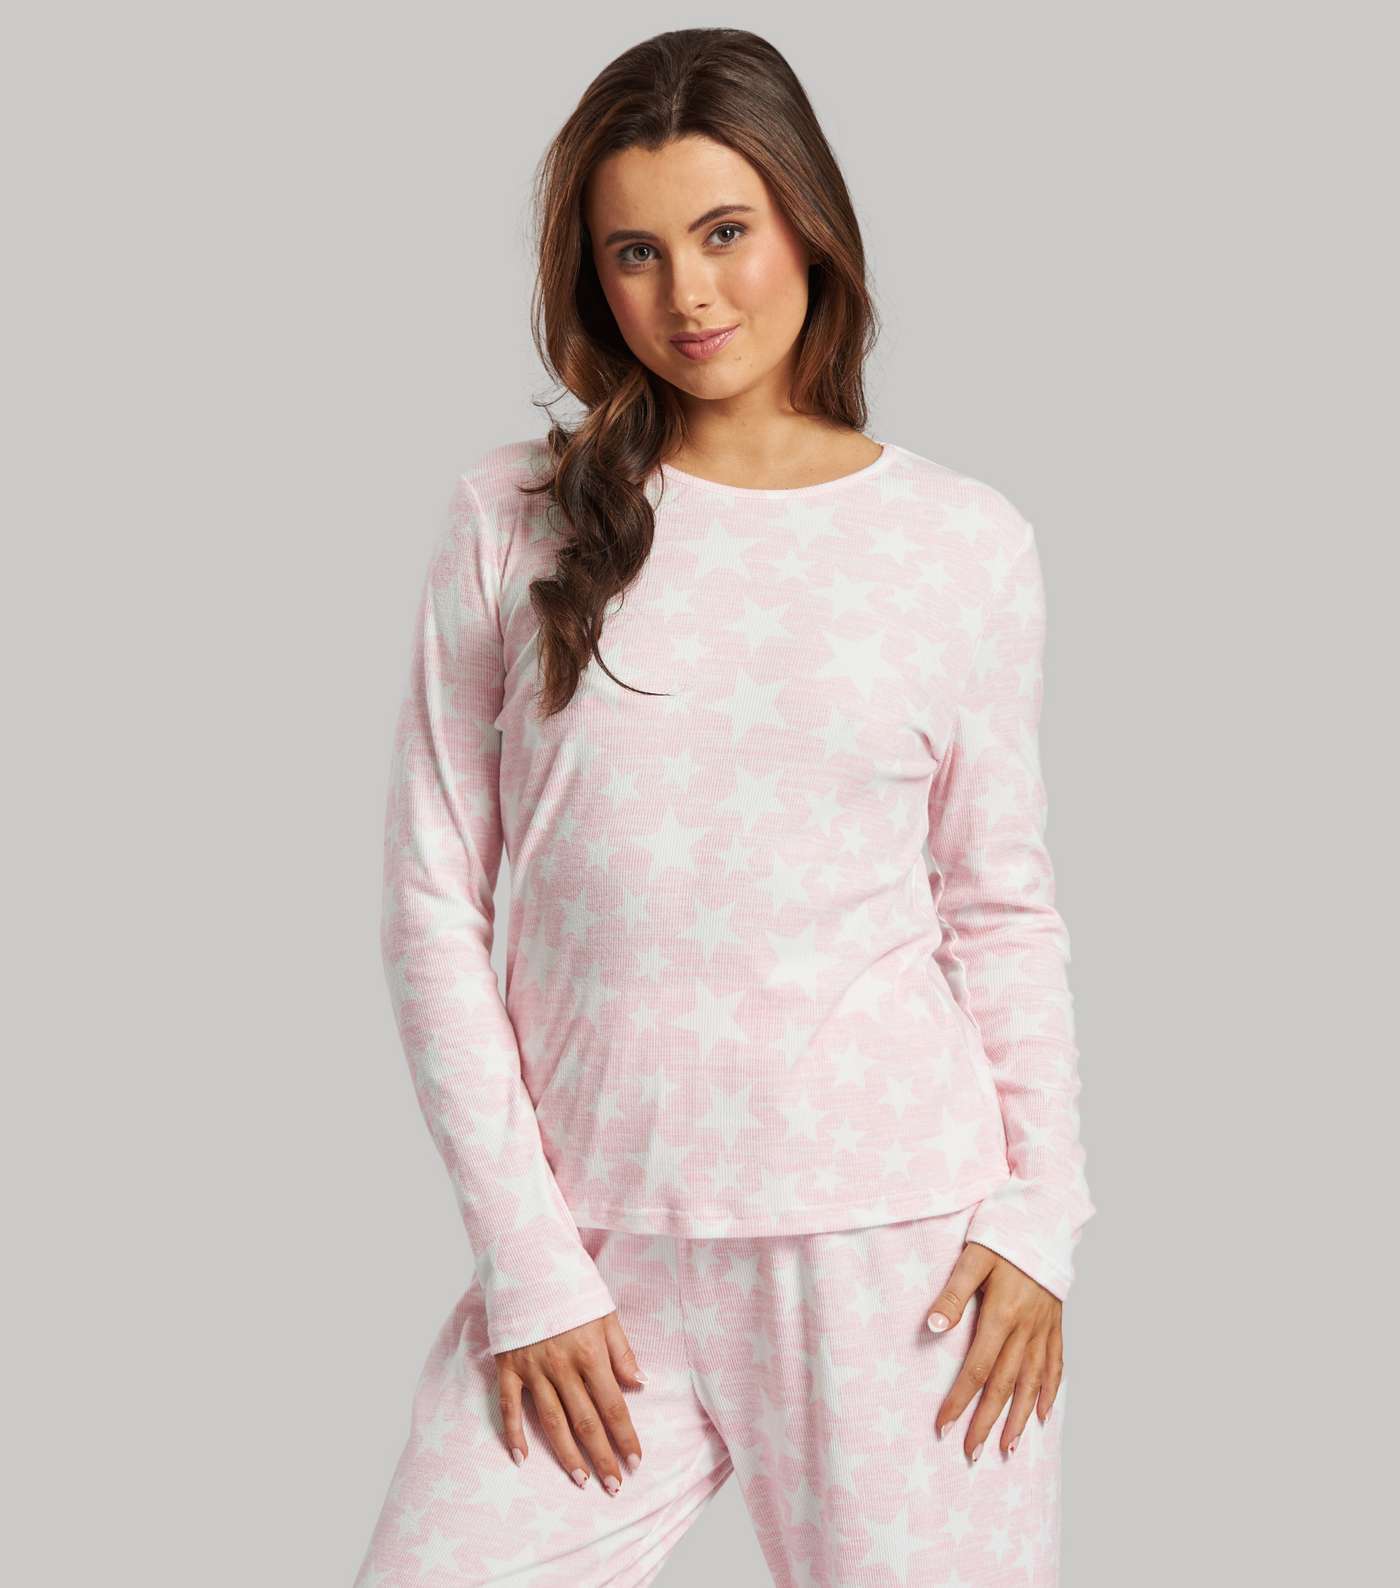 Loungeable Pink Super Soft Ribbed Trouser Pyjama Set with Star Print Image 2